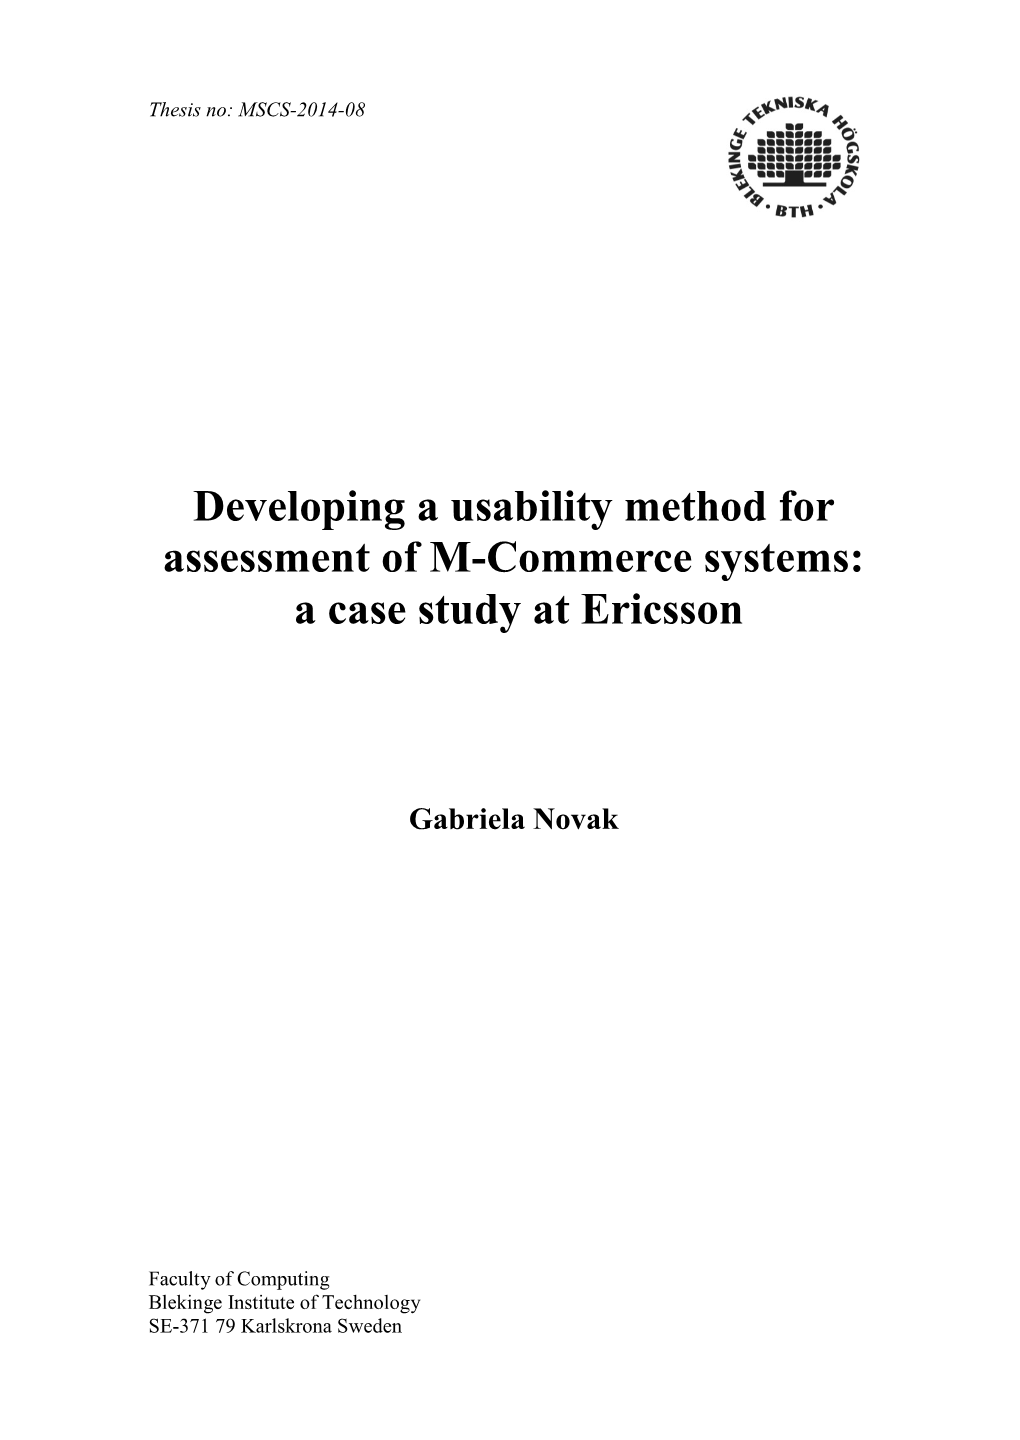 Developing a Usability Method for Assessment of M-Commerce Systems: a Case Study at Ericsson